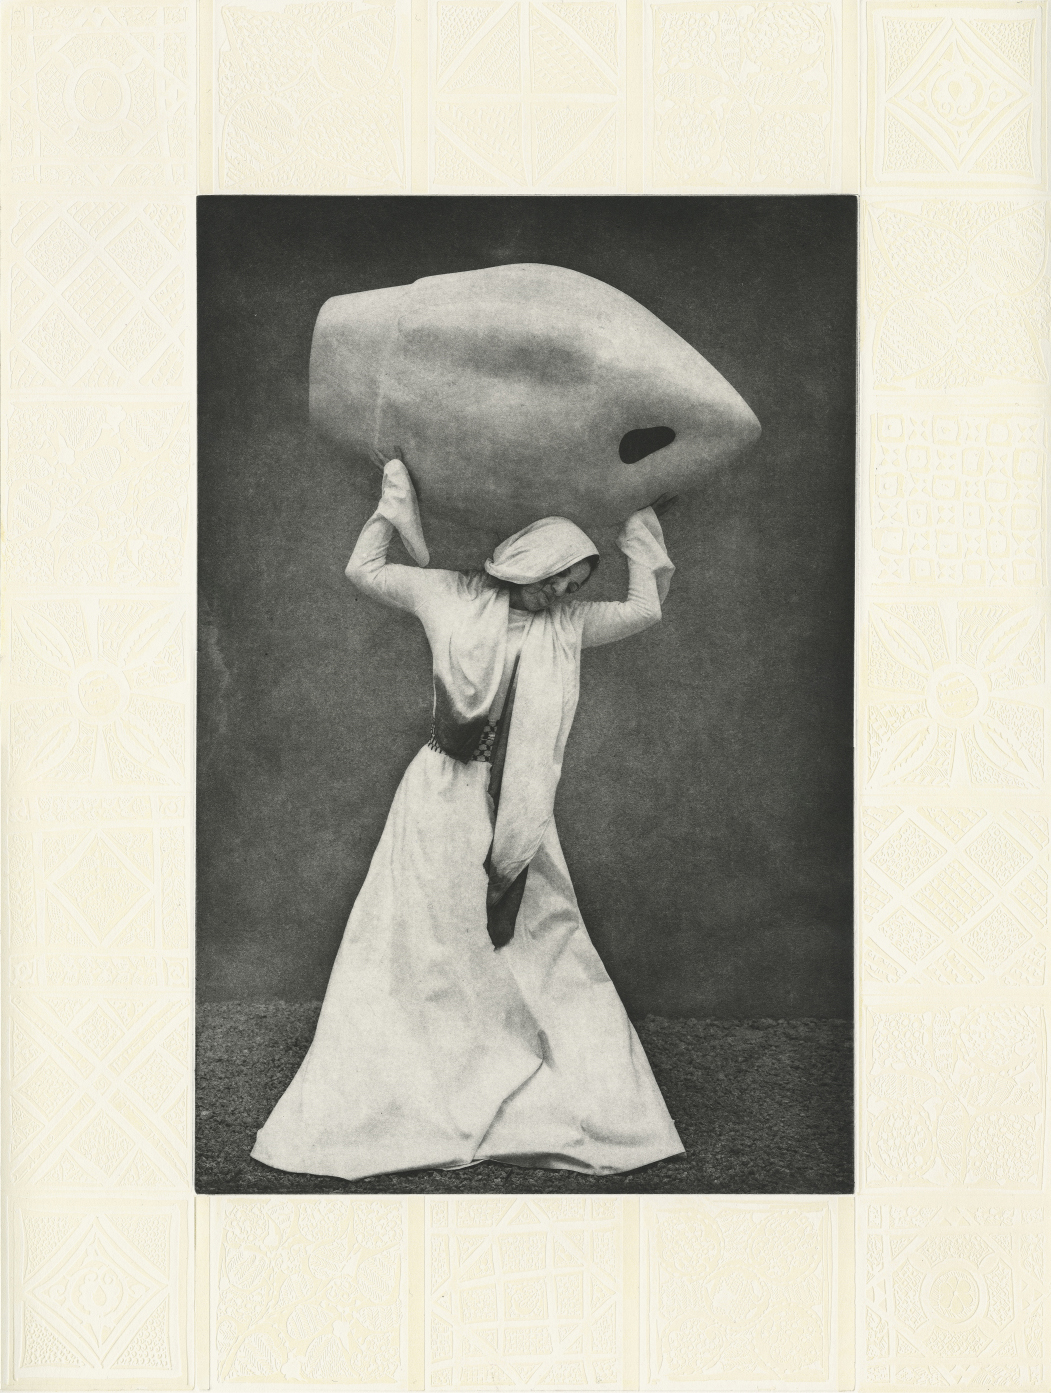 Sama Alshaibi, Water Bearer II, 2019. Photogravure print and blind embossing with transparent ink relief rolled on Stonehenge white 100% rag paper. Courtesy of the artist.